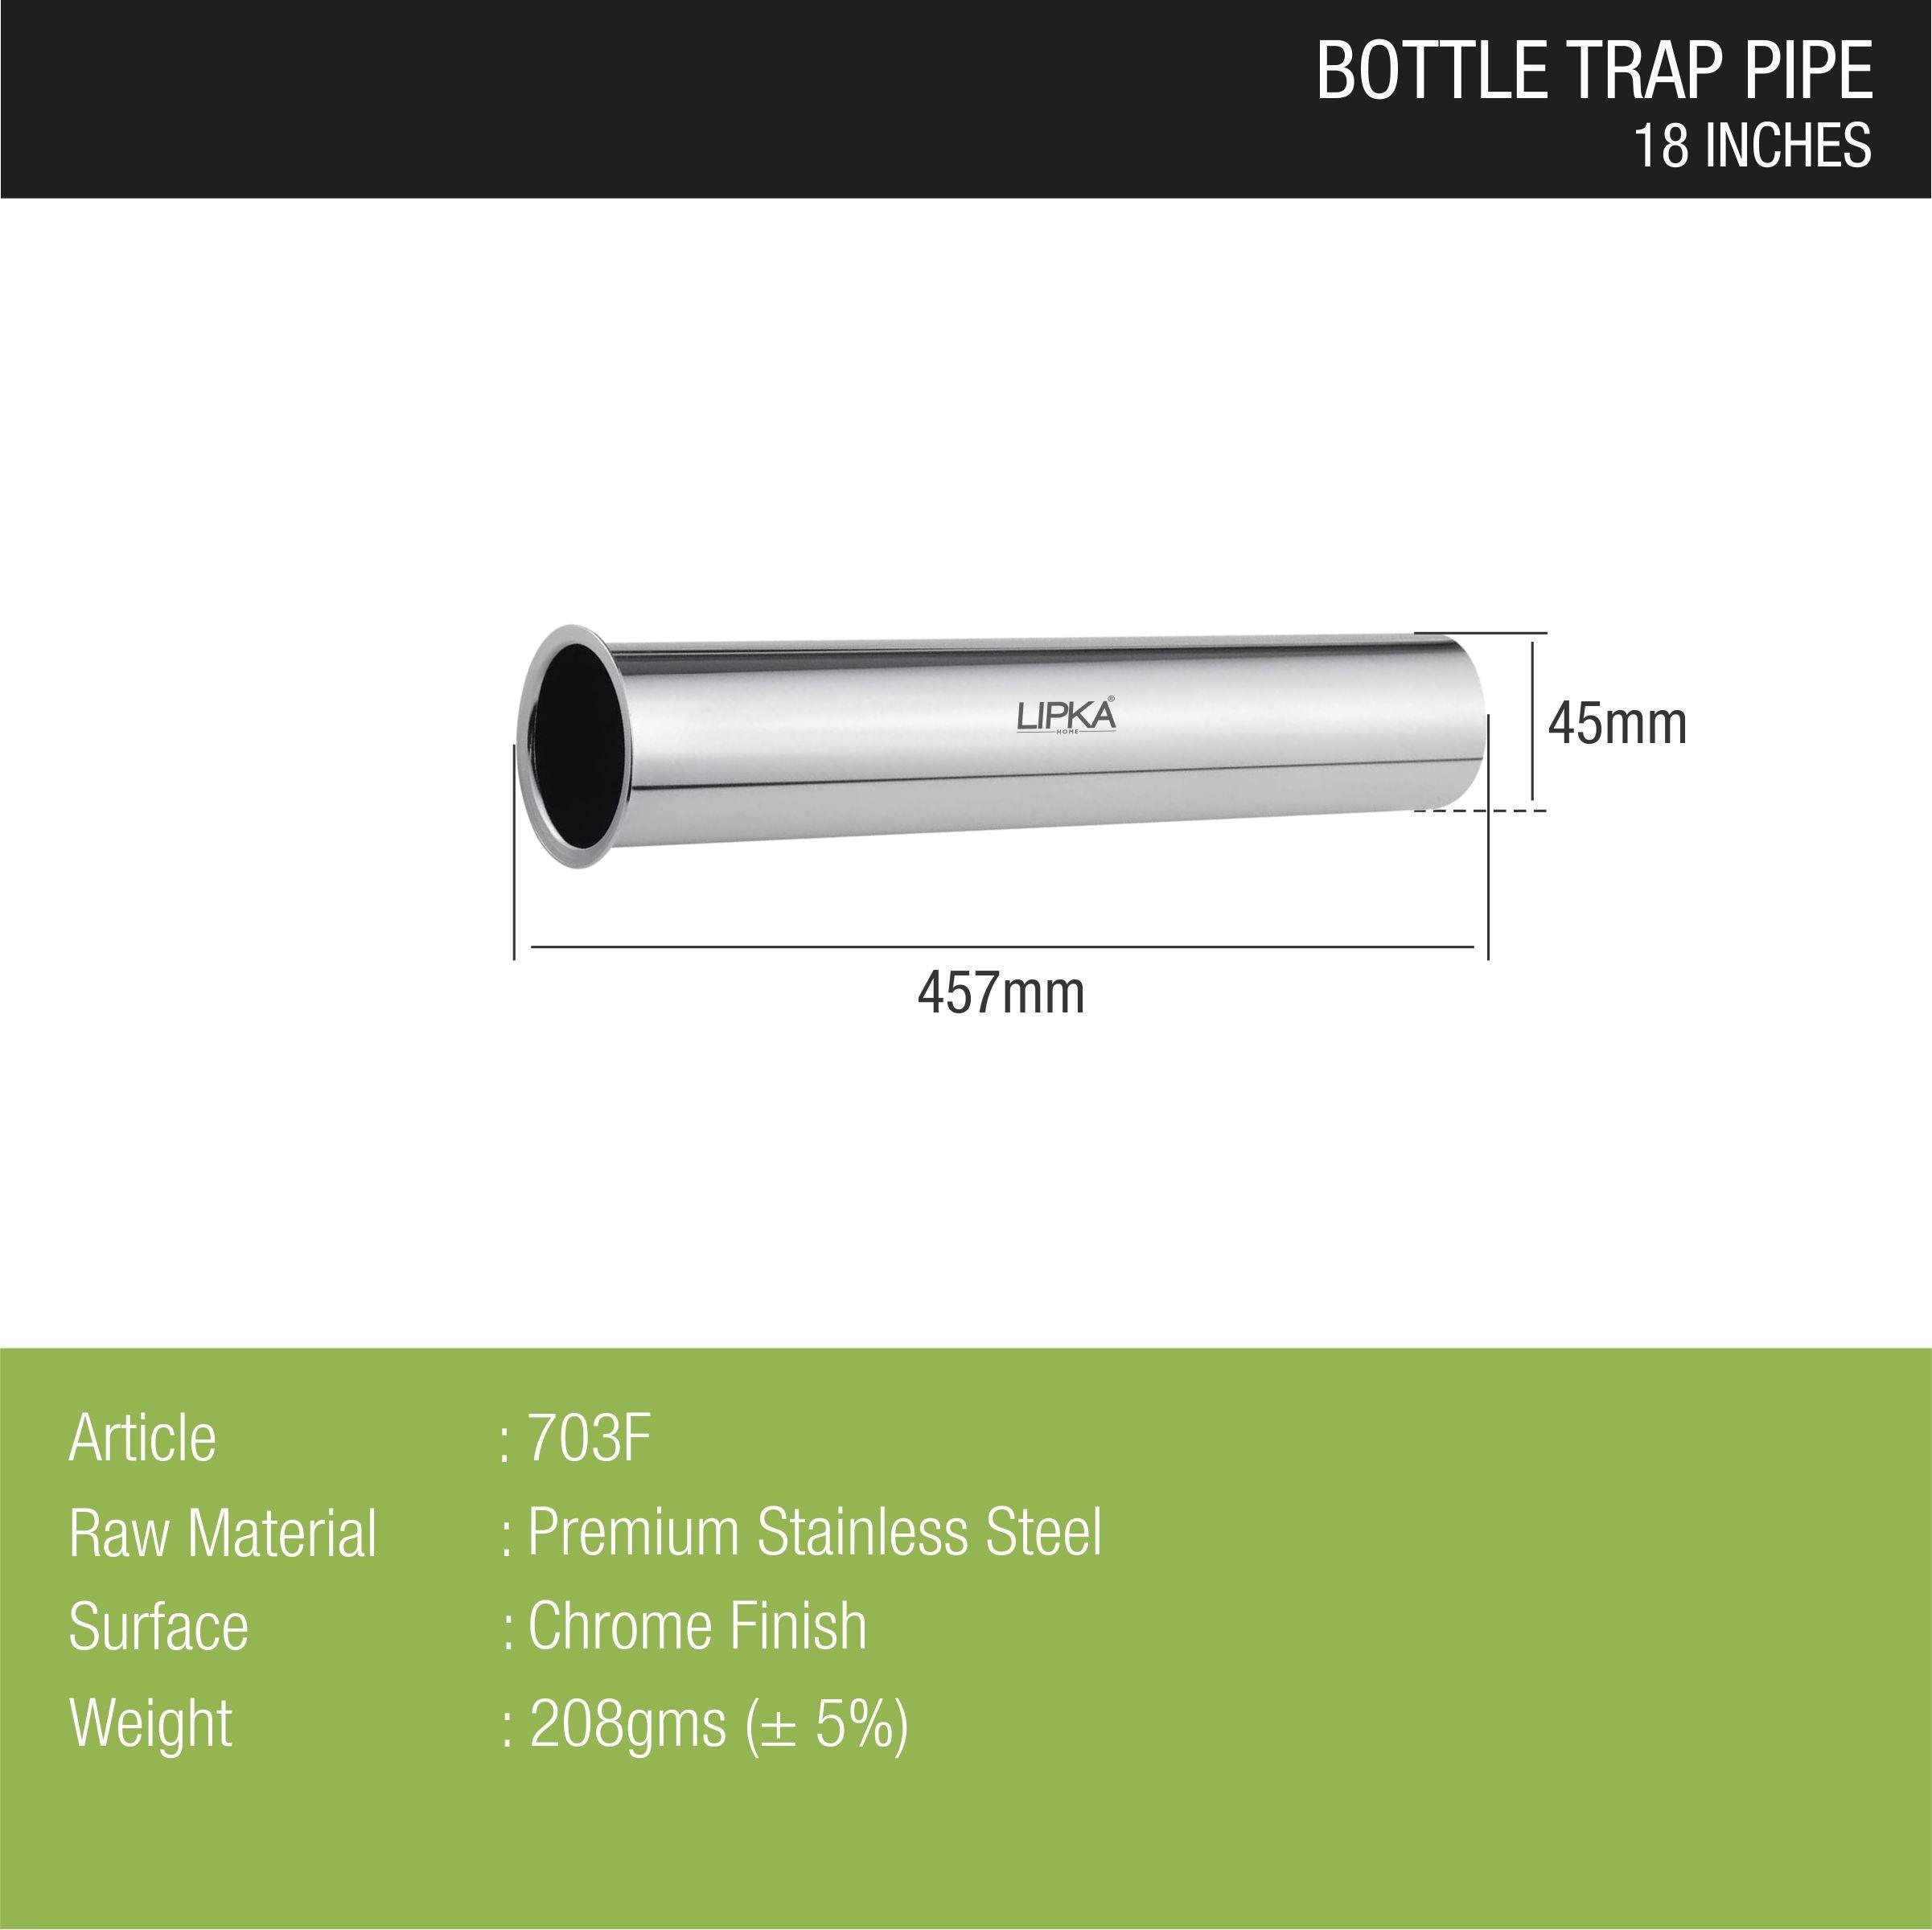 Bottle Trap Stainless Steel Pipe (18 inches) sizes and dimensions